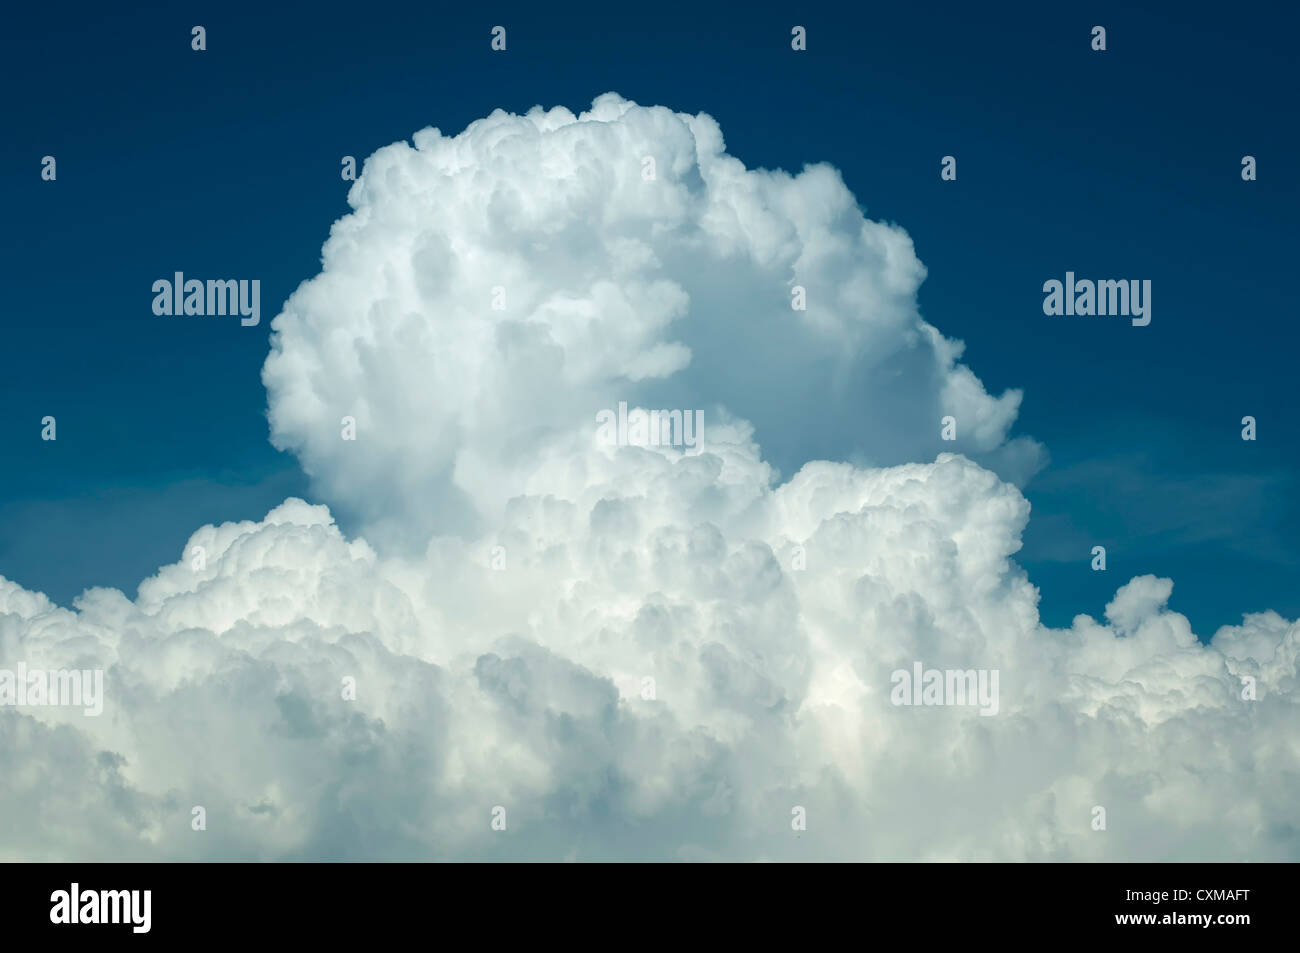 White dramatic clouds on blue sky for background Stock Photo